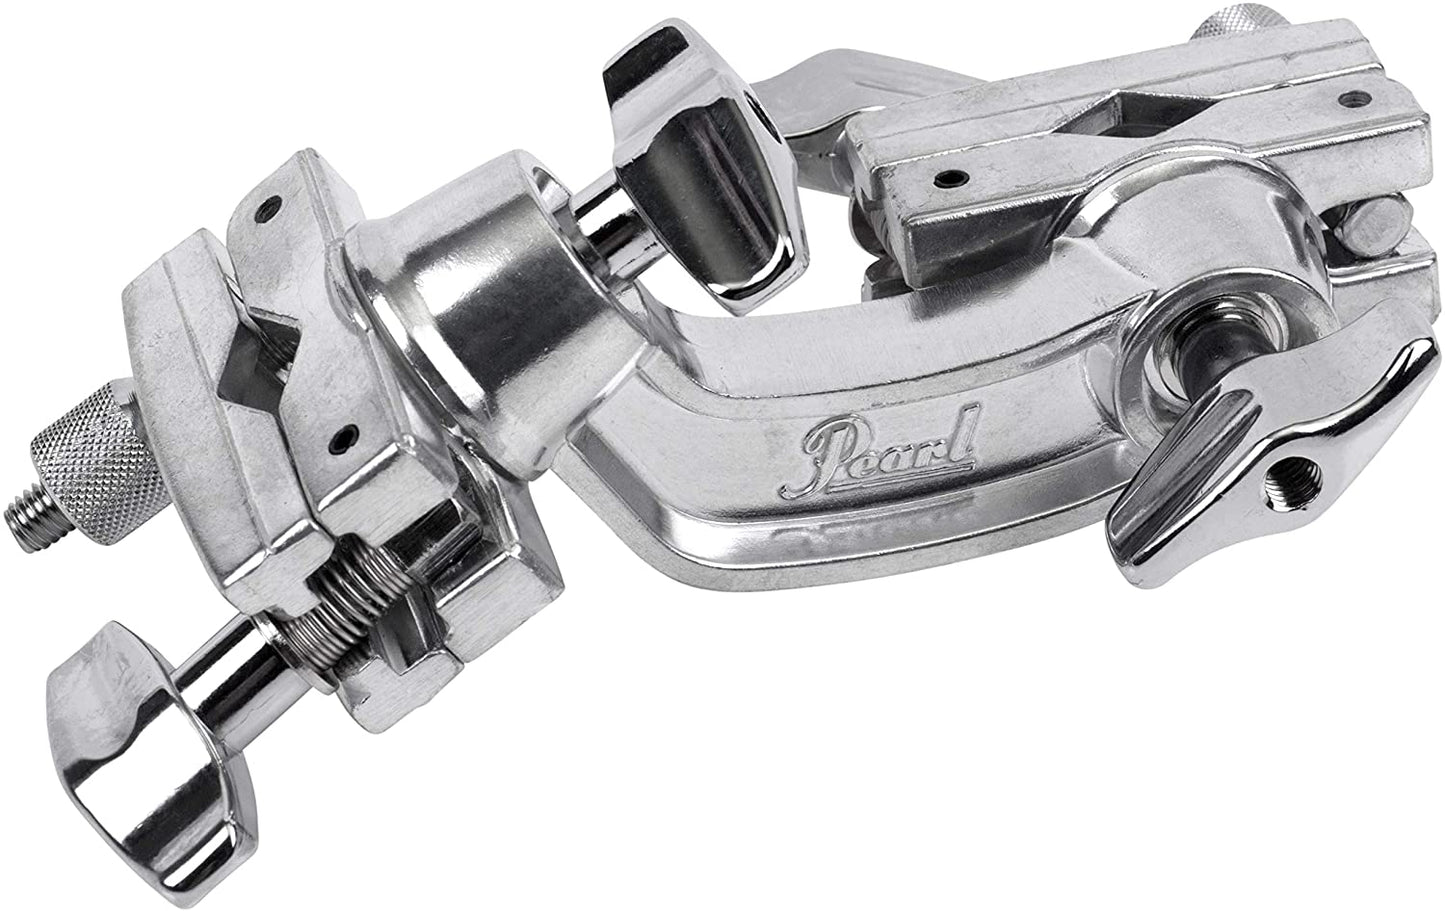 Pearl AX25 Quick-release Rotating Multi Clamp Dual Axis Adapter (1/2" to 1-1/8") for Drum Kit Set